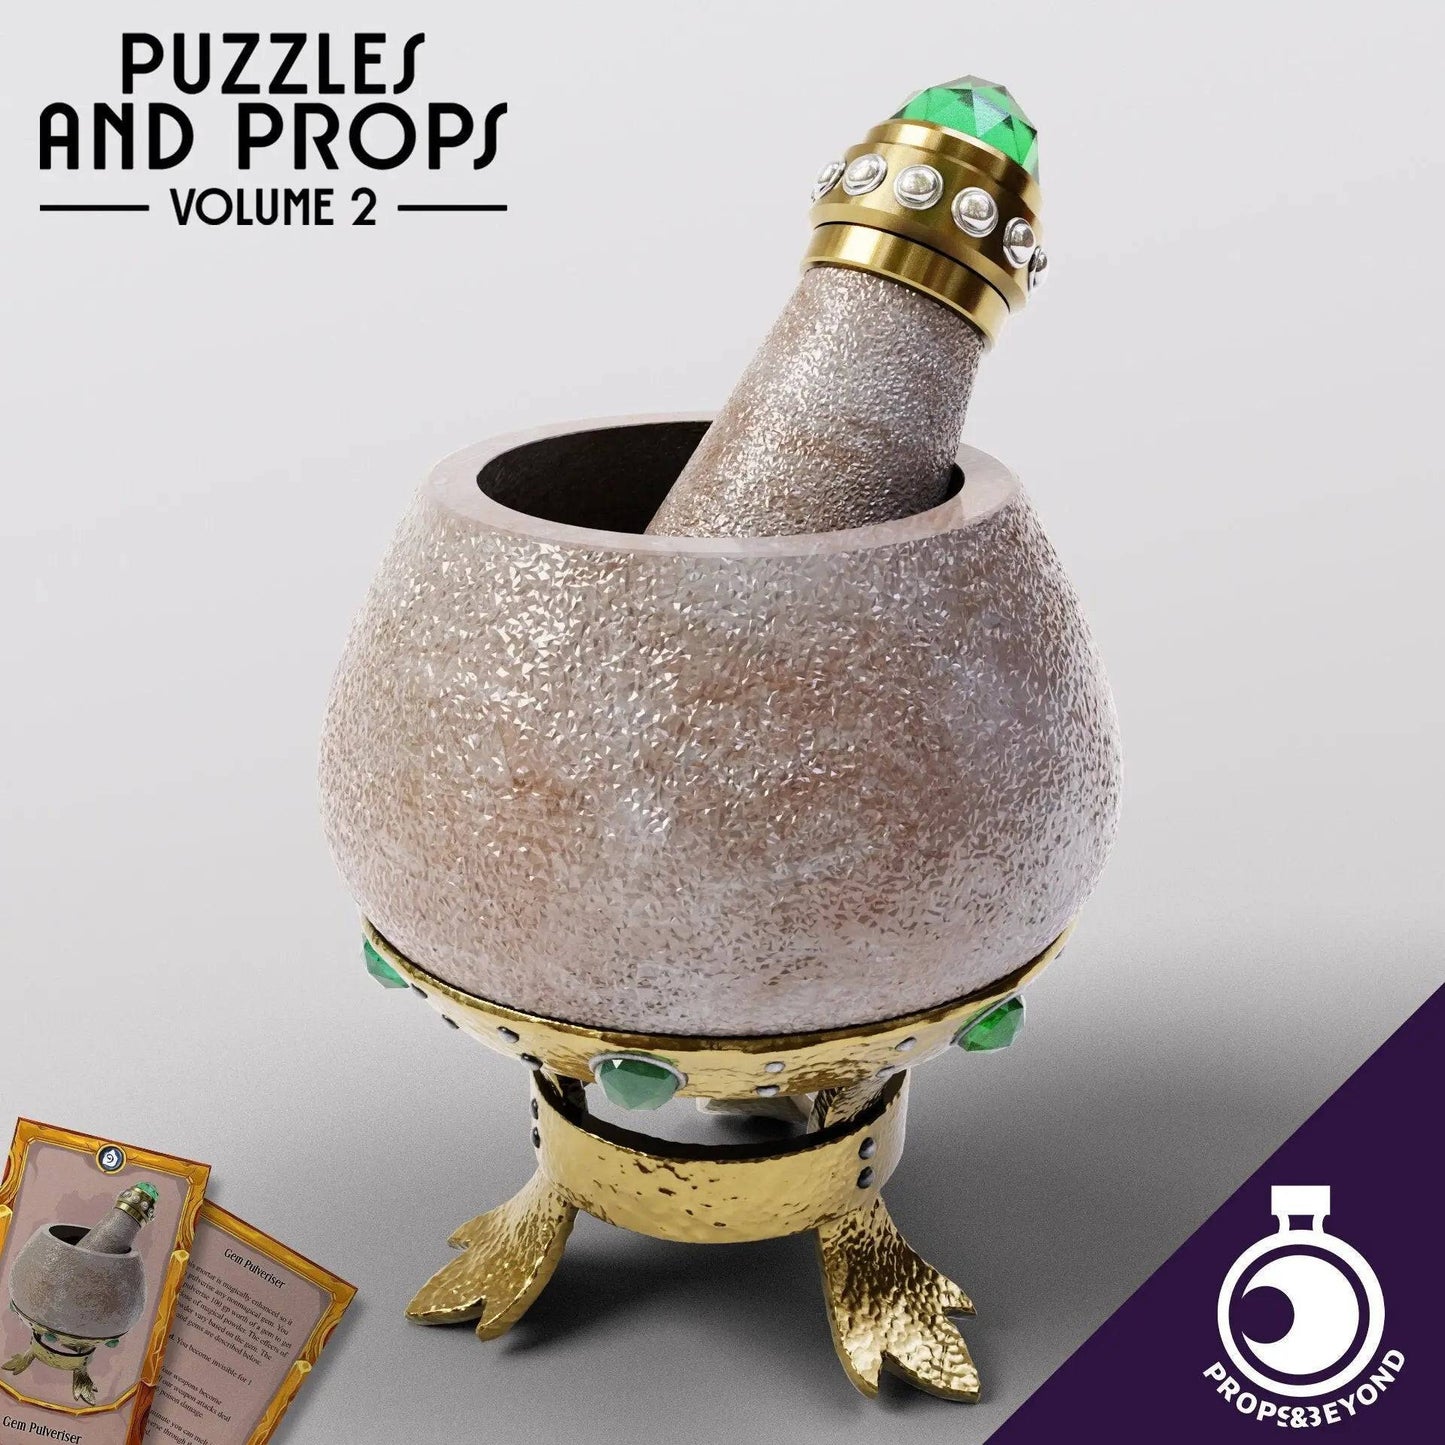 Alchemy Utensils - Mortar and Pestle | TTRPG LARP Gaming Prop | Puzzles & Props - Tattles Told 3D